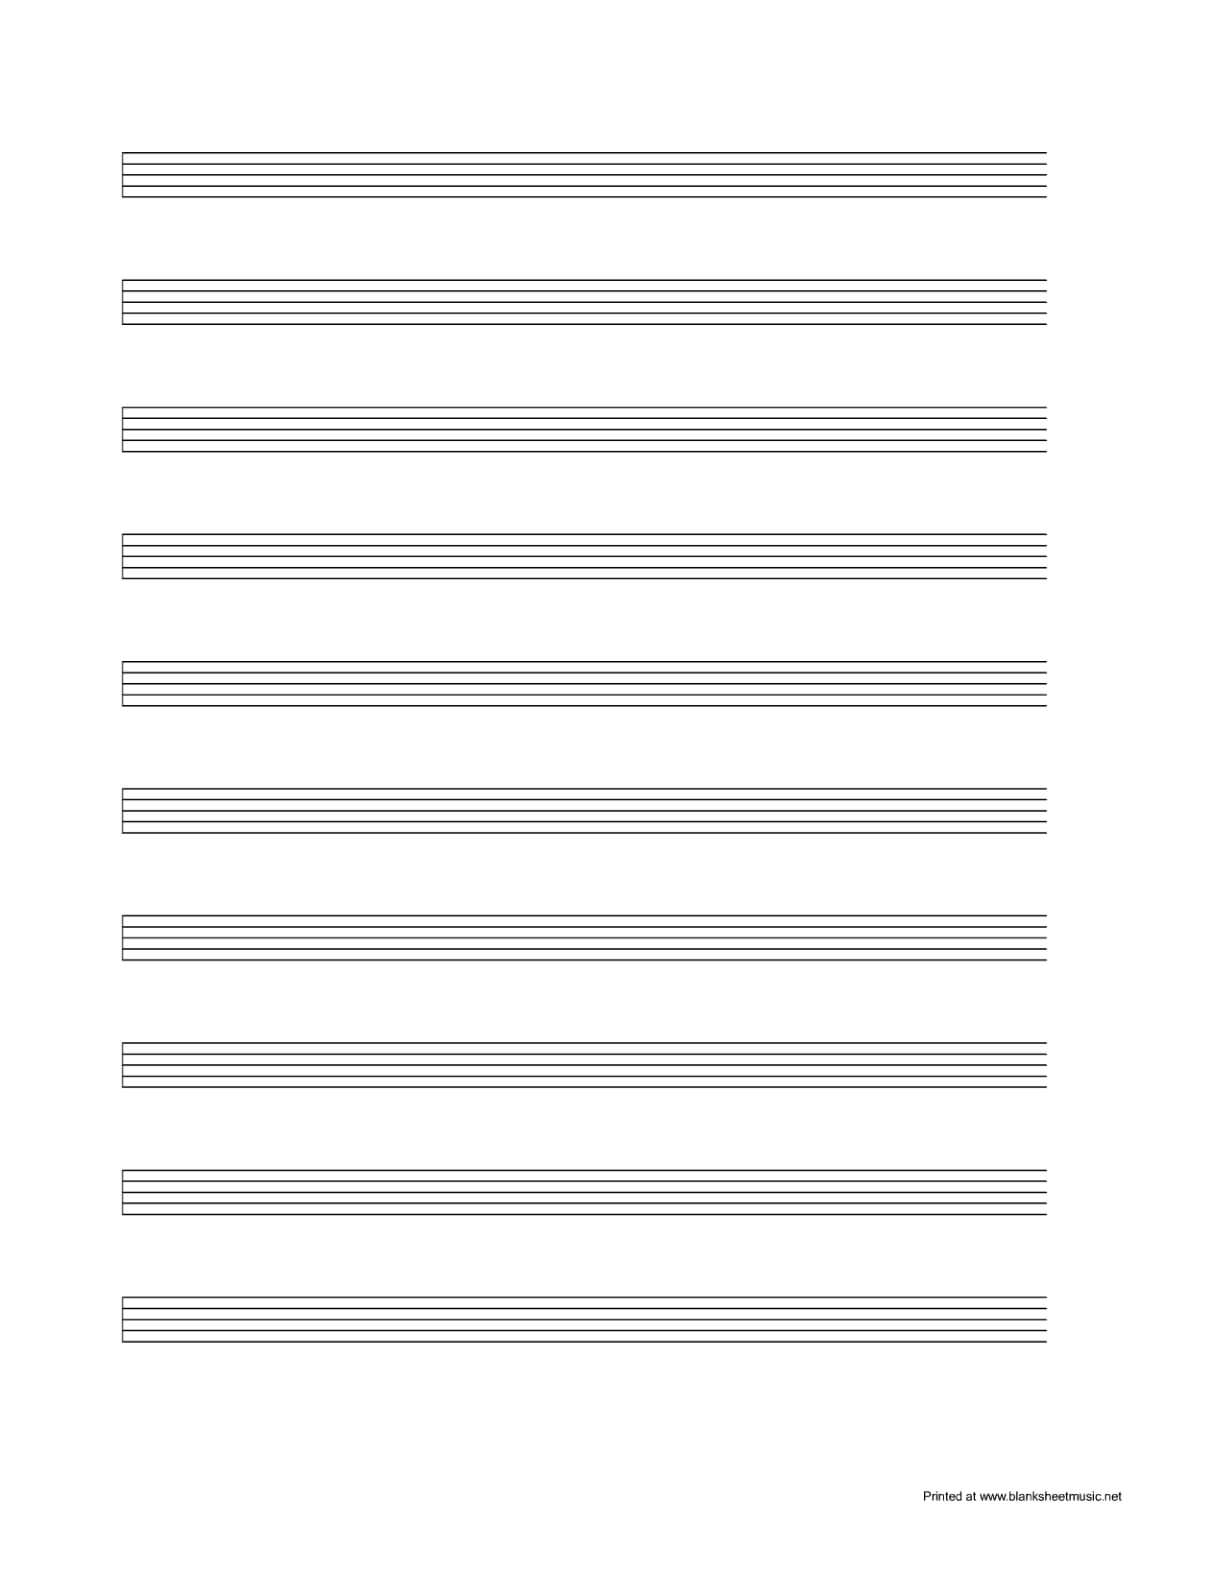 Sheet Music Template Blank For Word Free Pdf Spreadsheet With Blank Sheet Music Template For Word